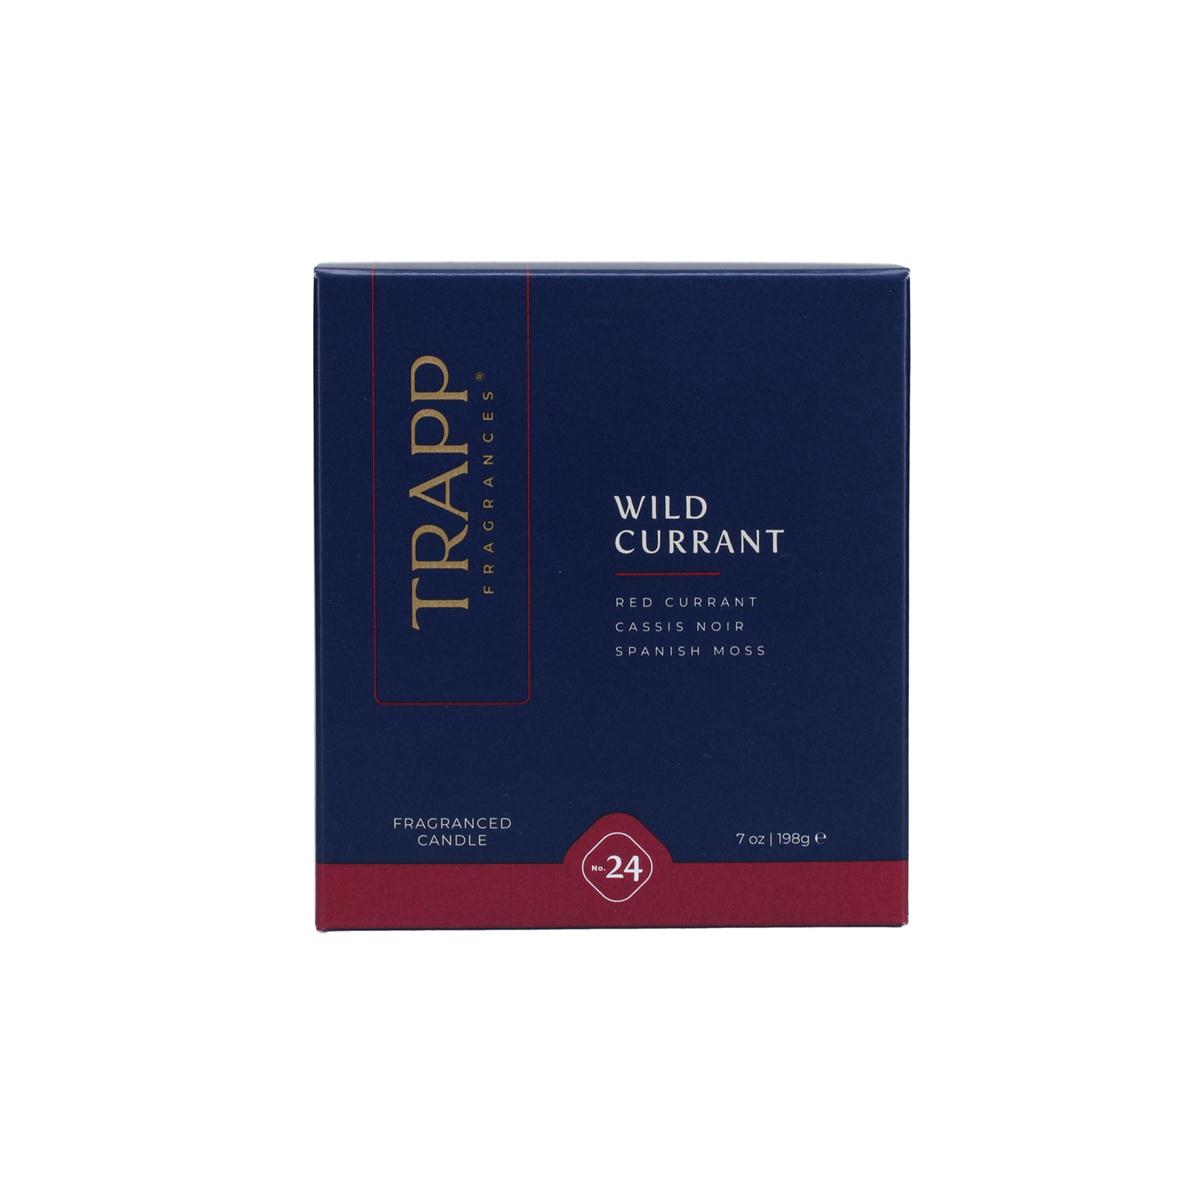 No. 24 Wild Currant - 7 oz. Poured Candle